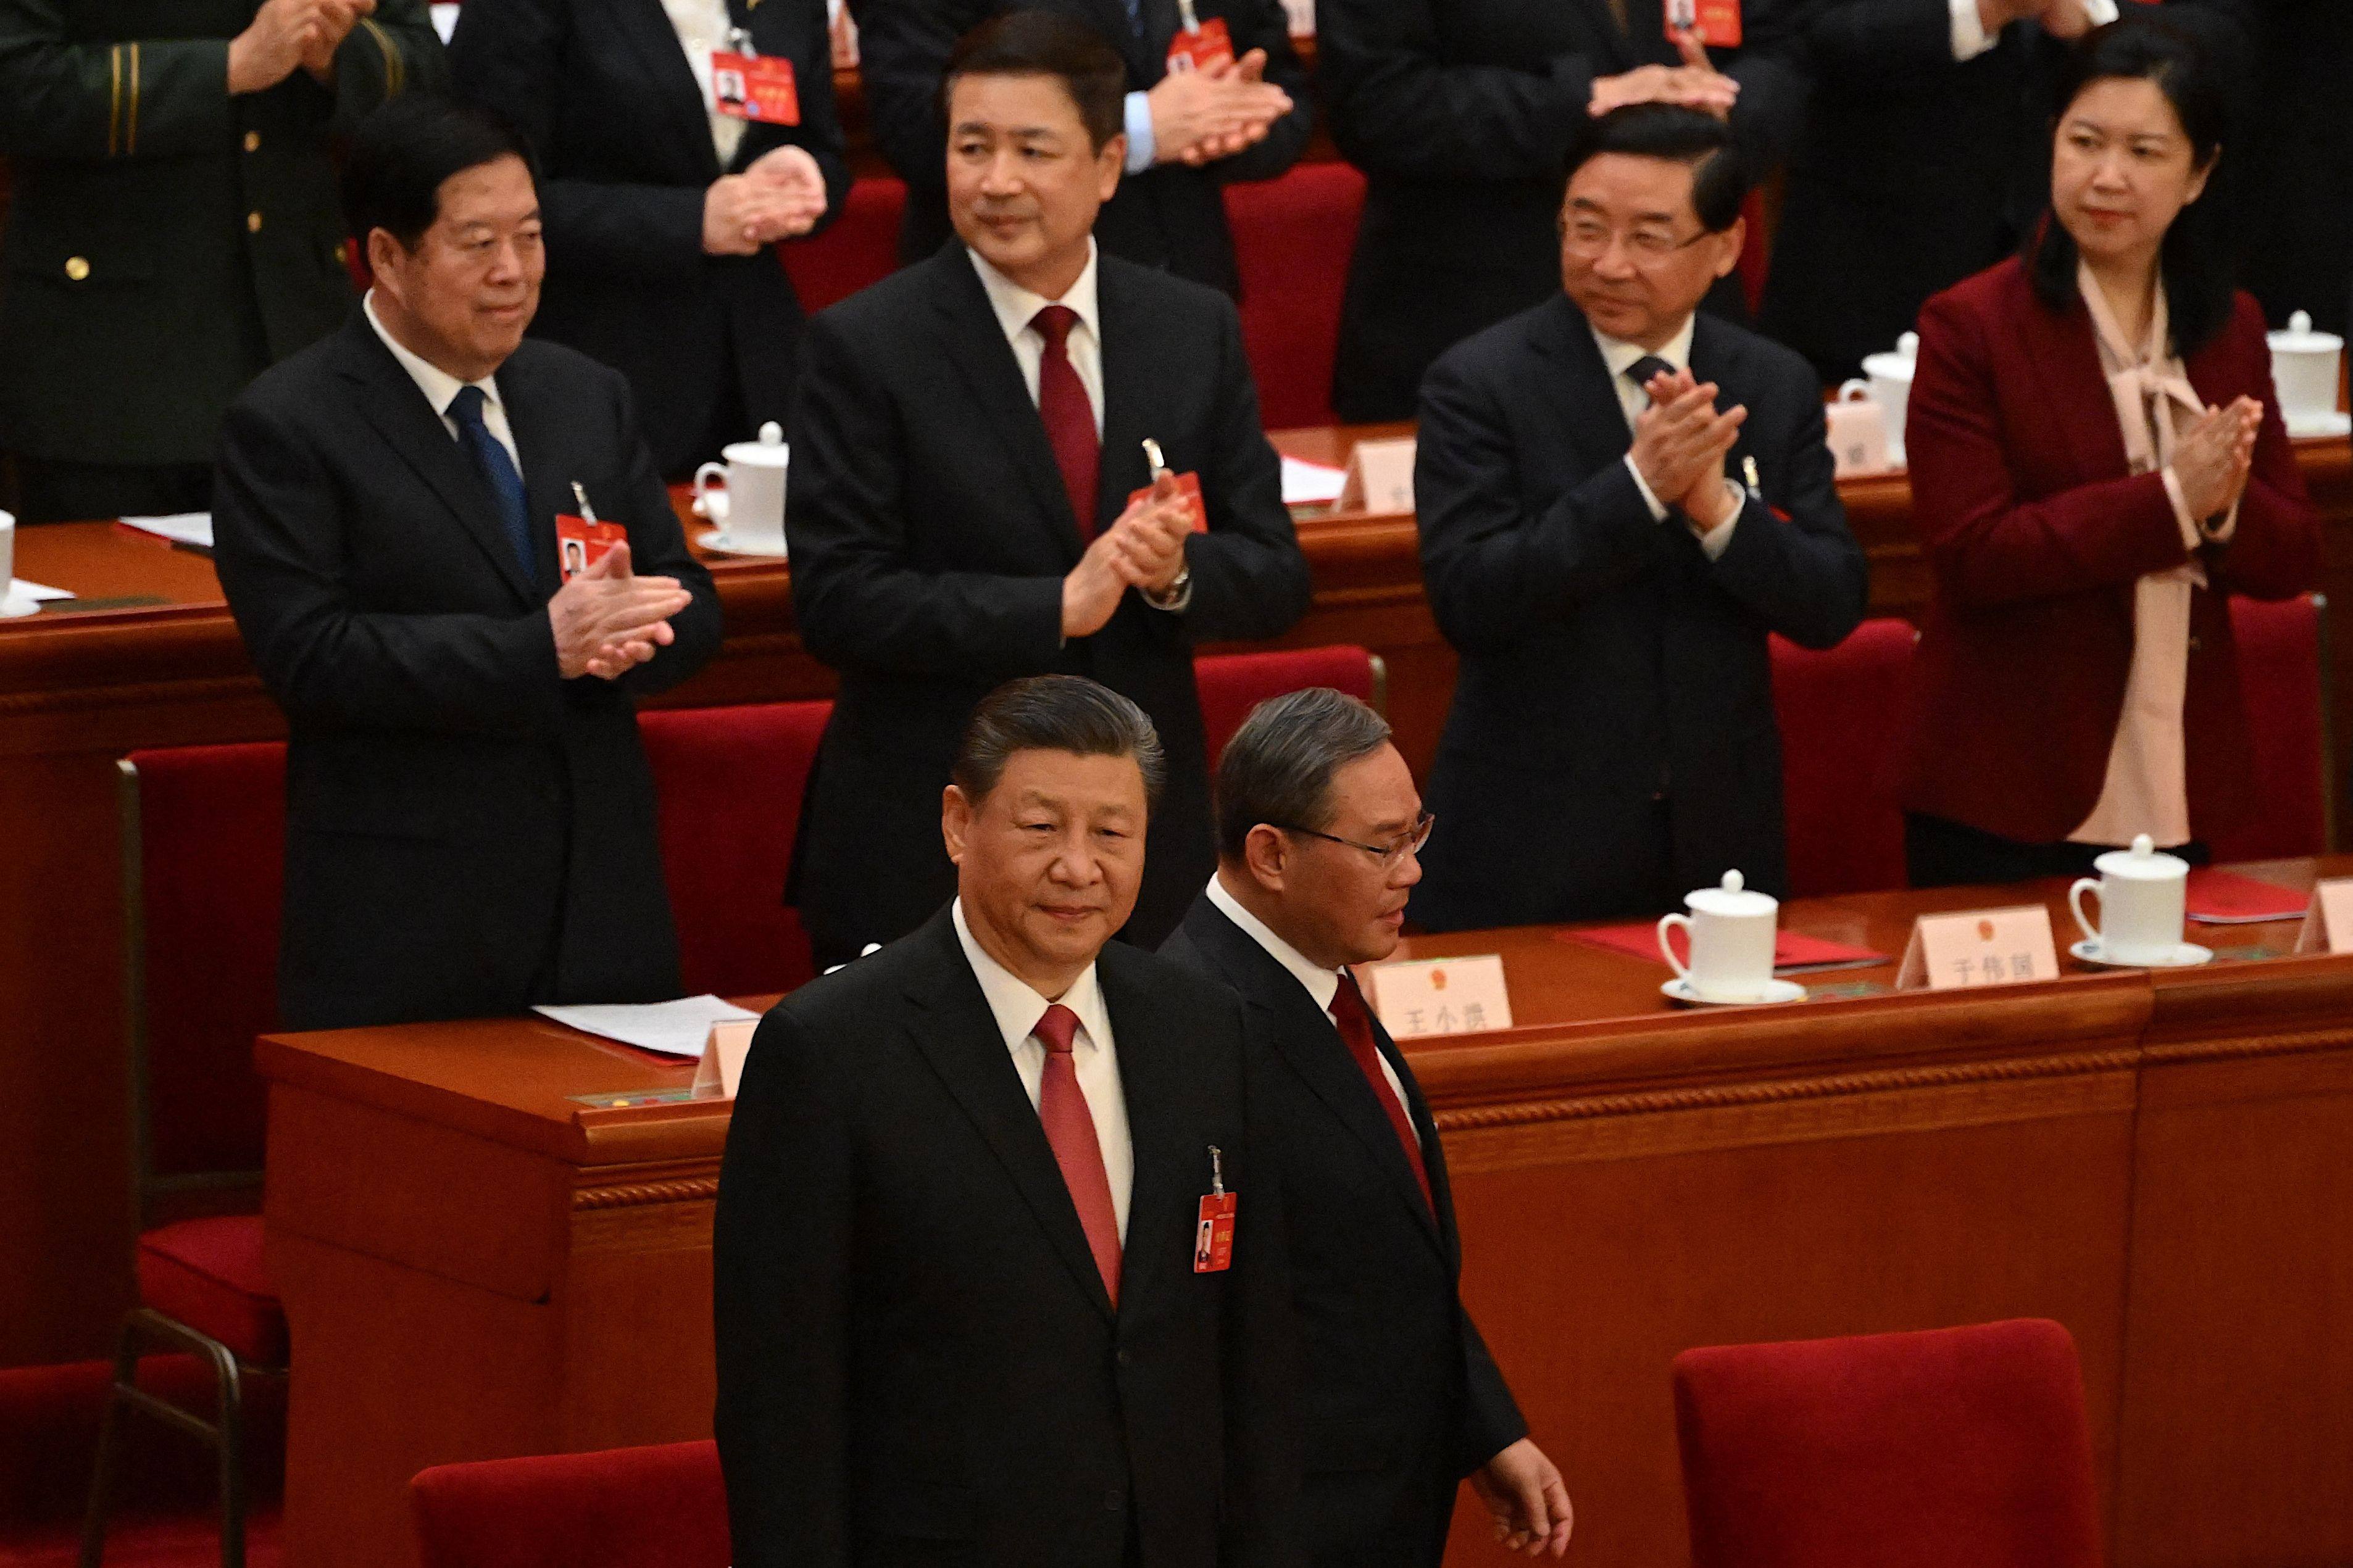 President Xi Jinping (front row, left) and Premier Li Qiang (front row, right) arrive for the closing session of the 14th National People’s Congress at the Great Hall of the People in Beijing on March 11. Photo: AFP